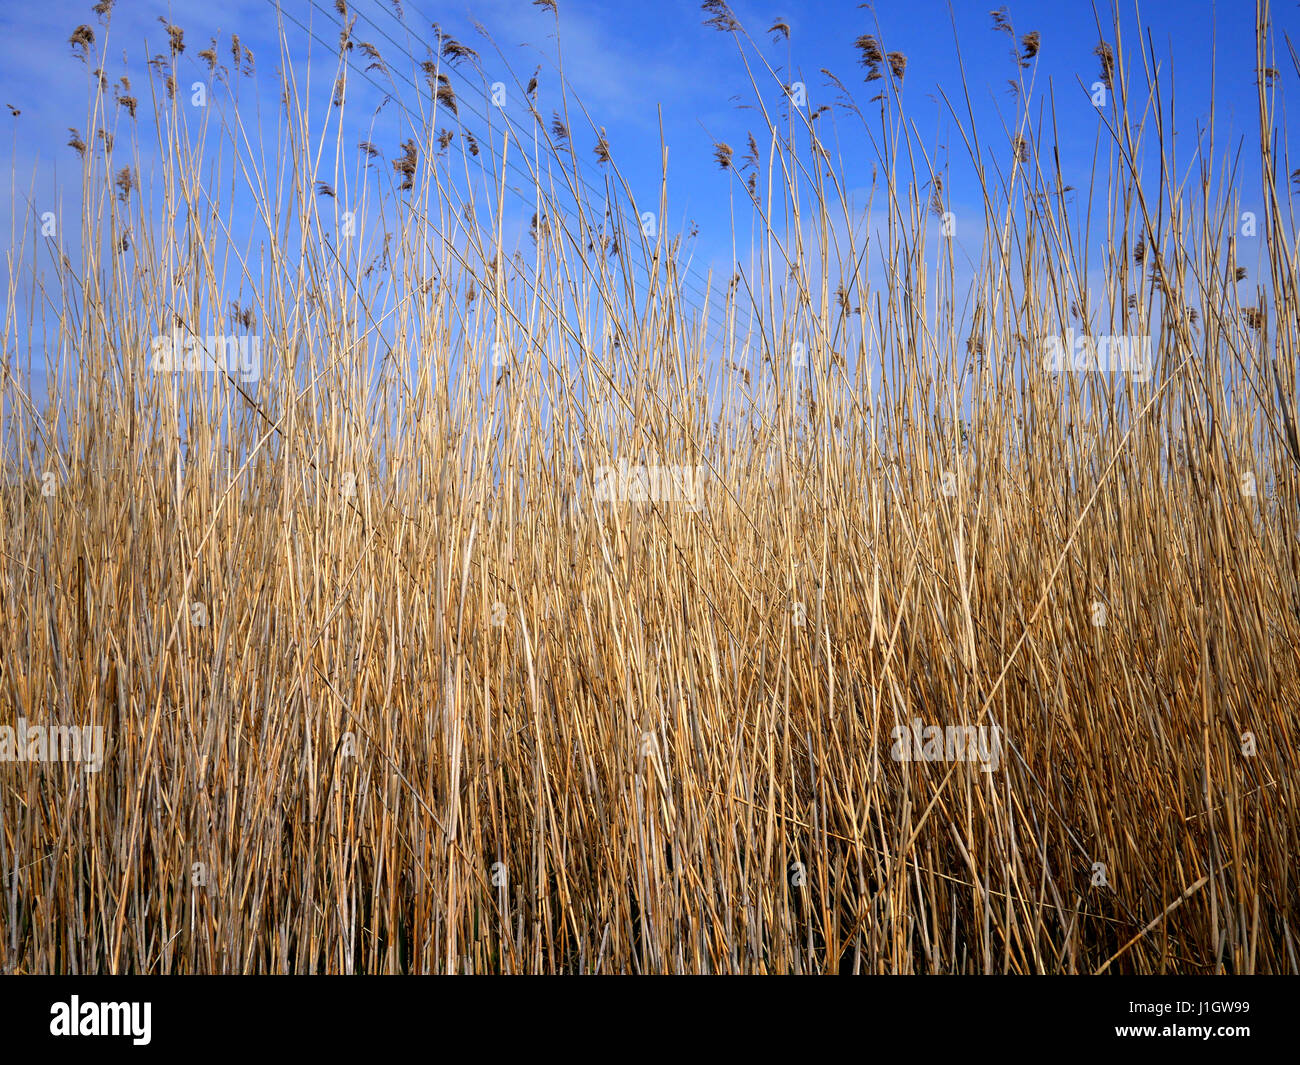 Reeds against a blue sky background Stock Photo